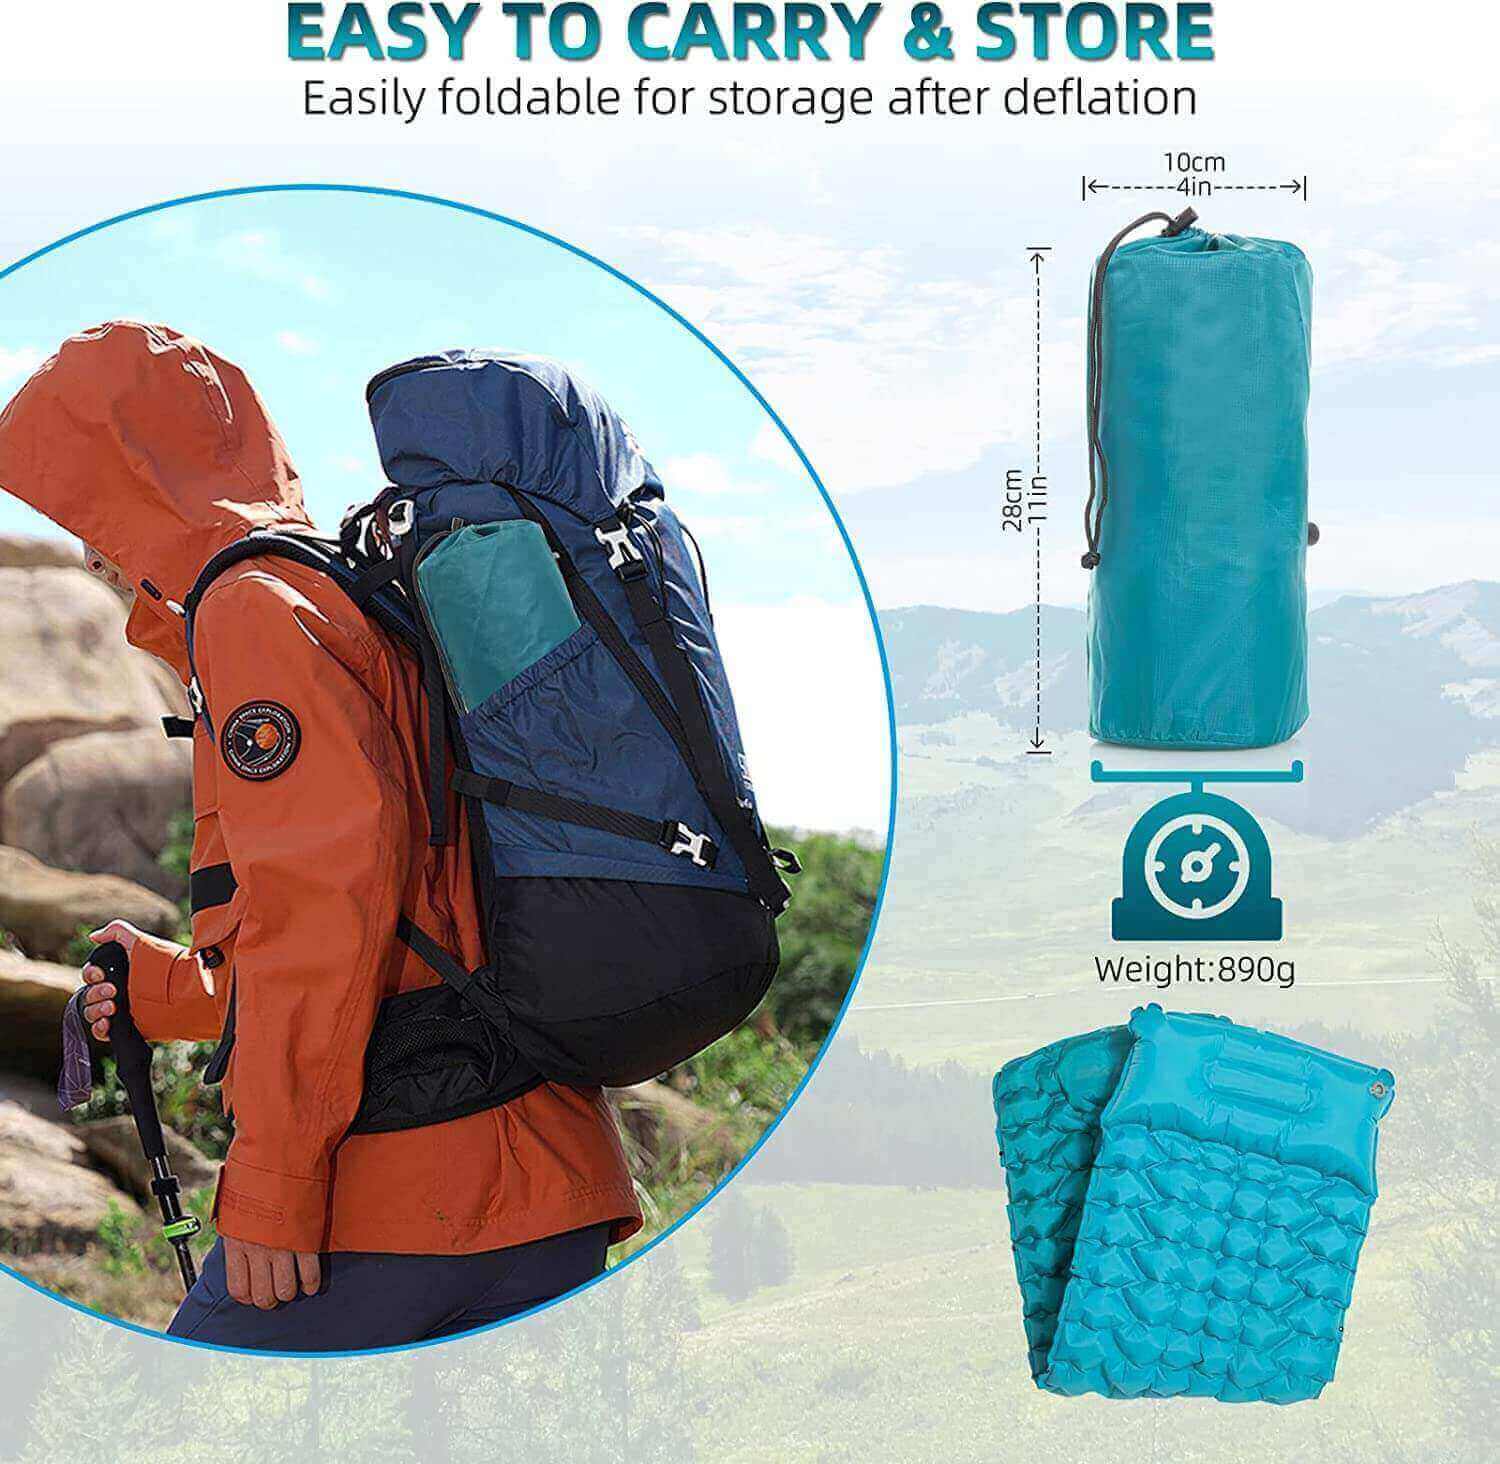 Self inflating camping mat with pillow, easy to carry